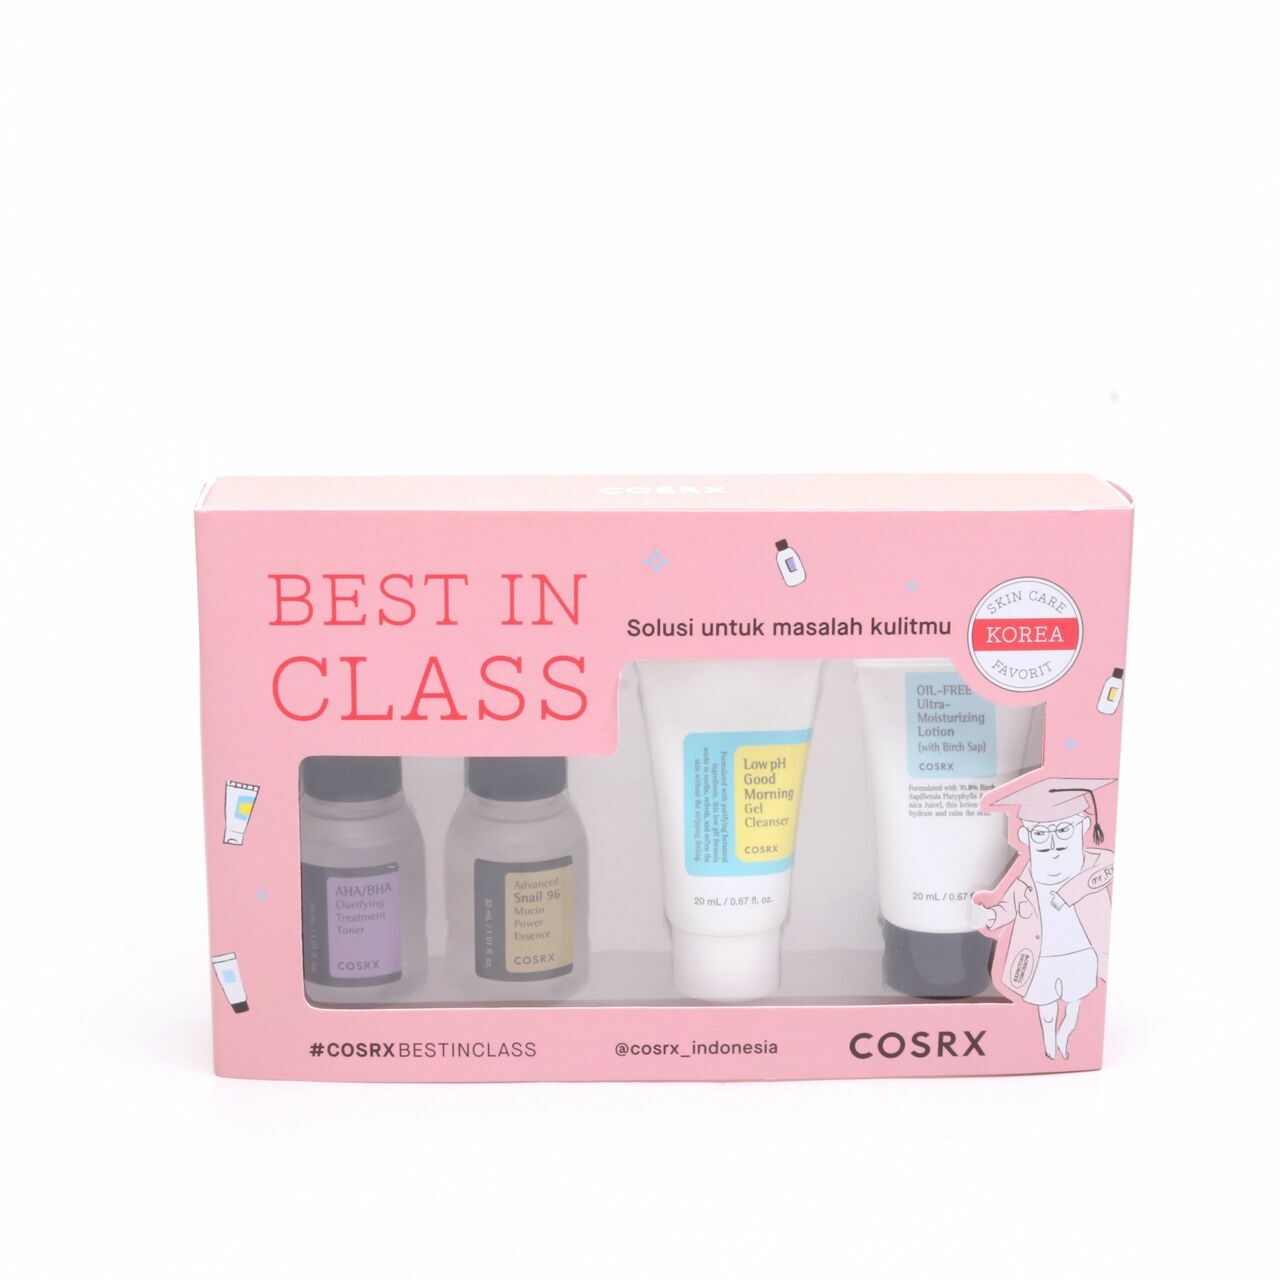 Cosrx Cosrx Best In Class Limited Edition (4x20ml) Skin Care